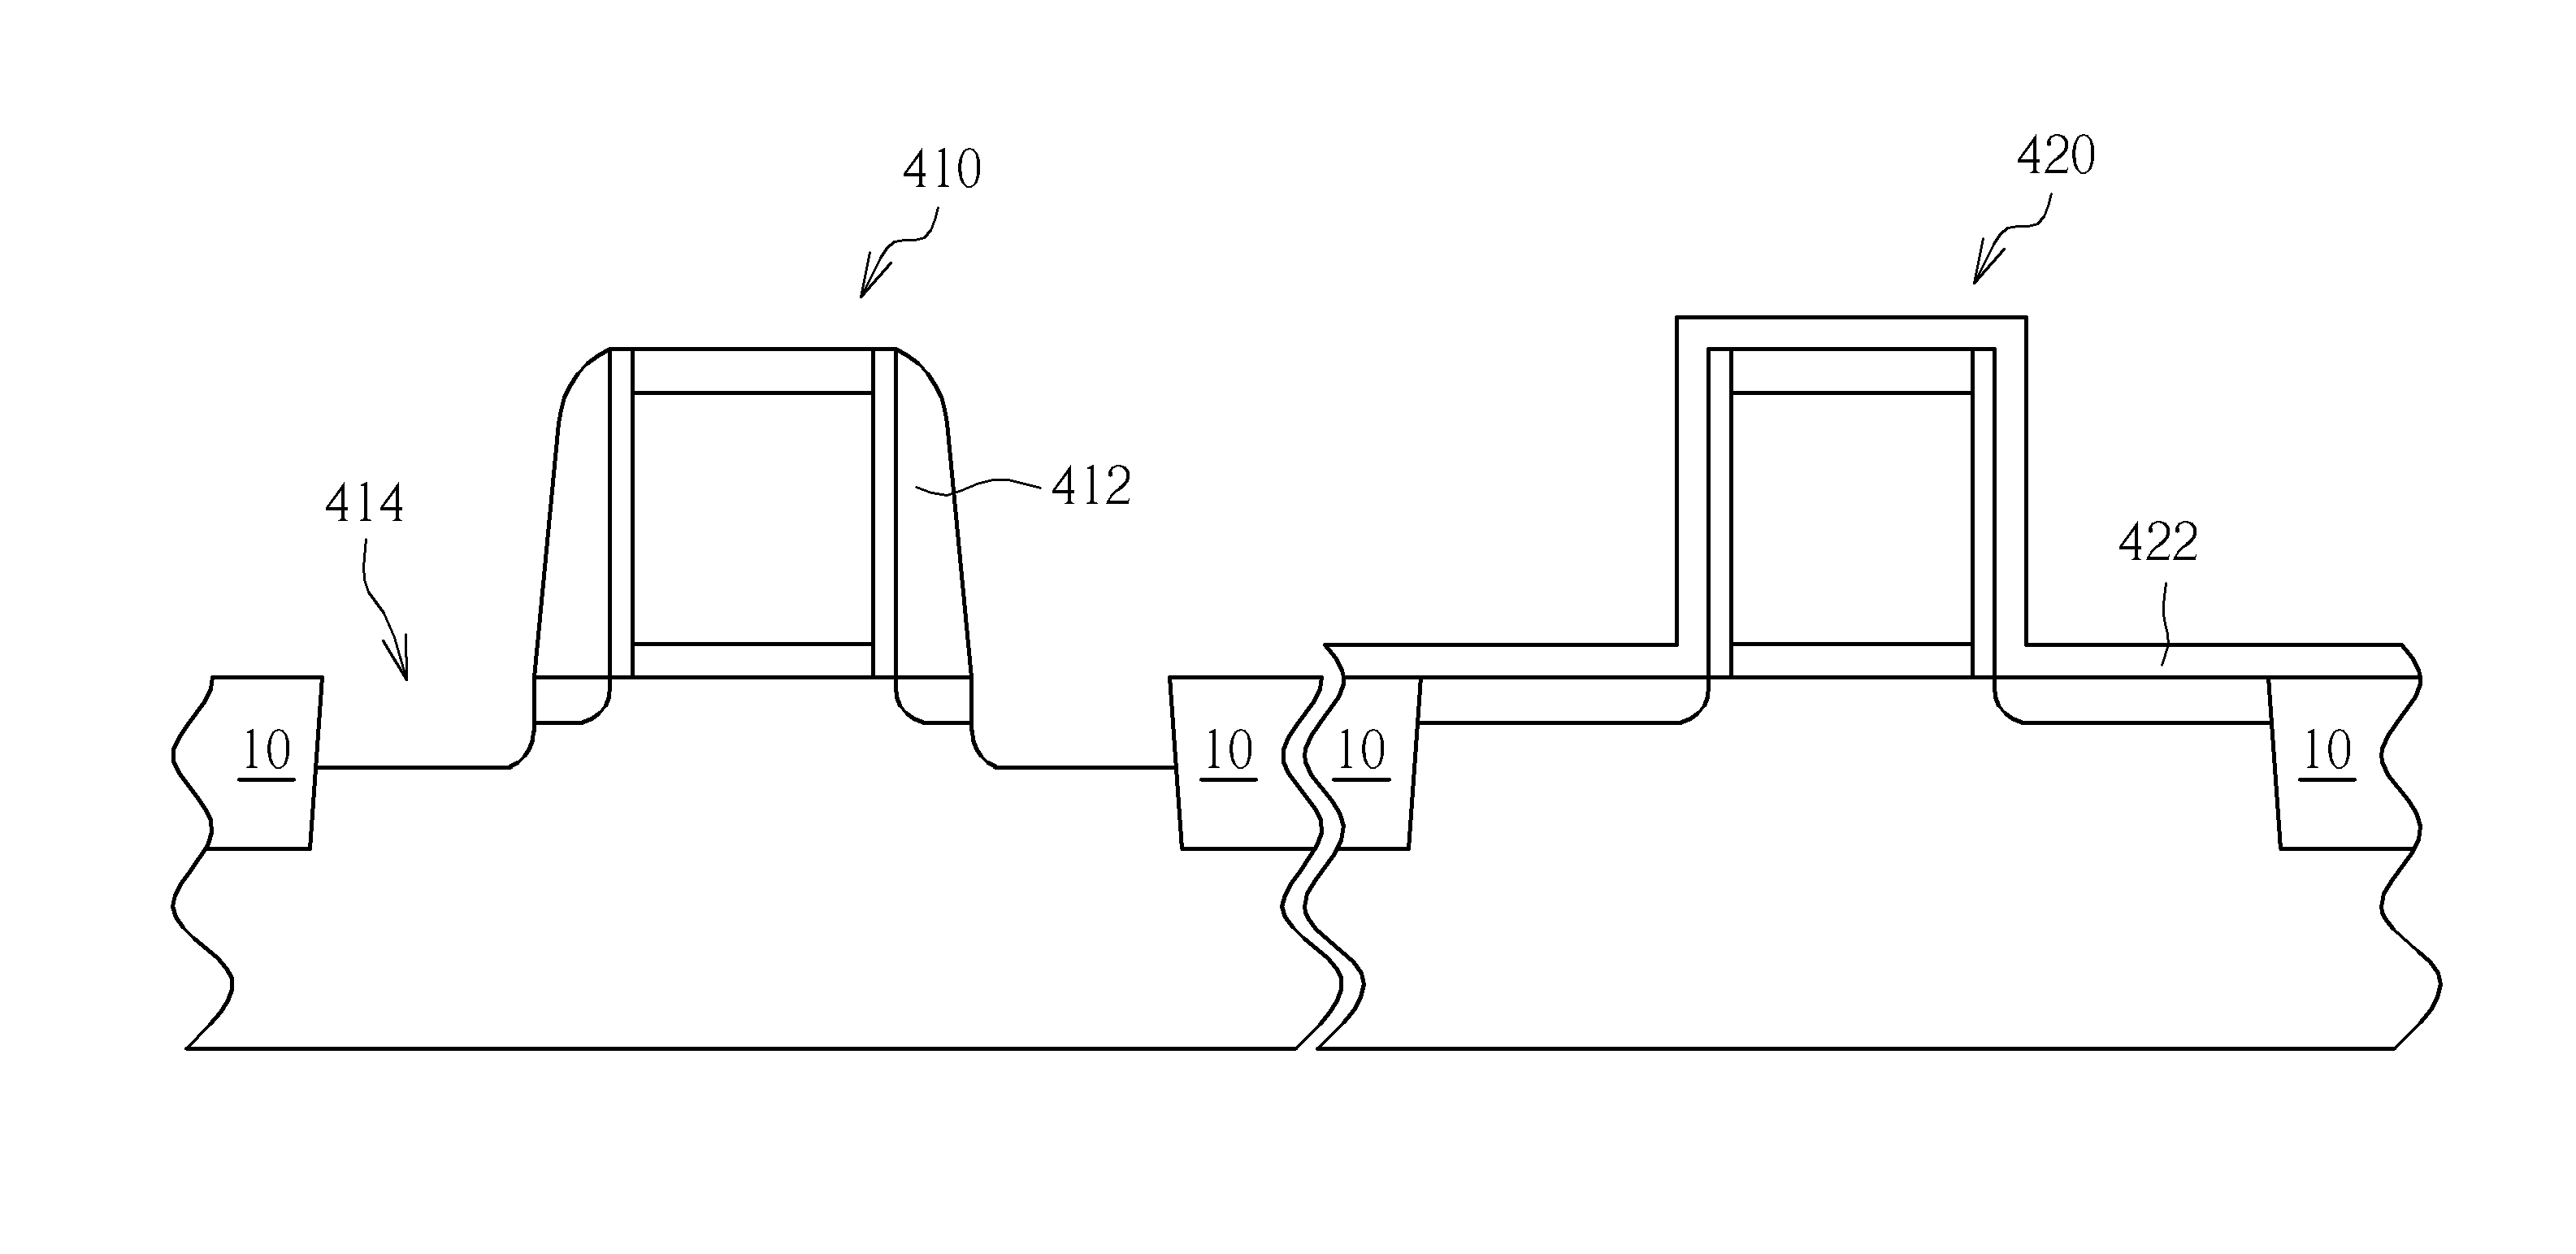 Method of fabricating an epitaxial layer